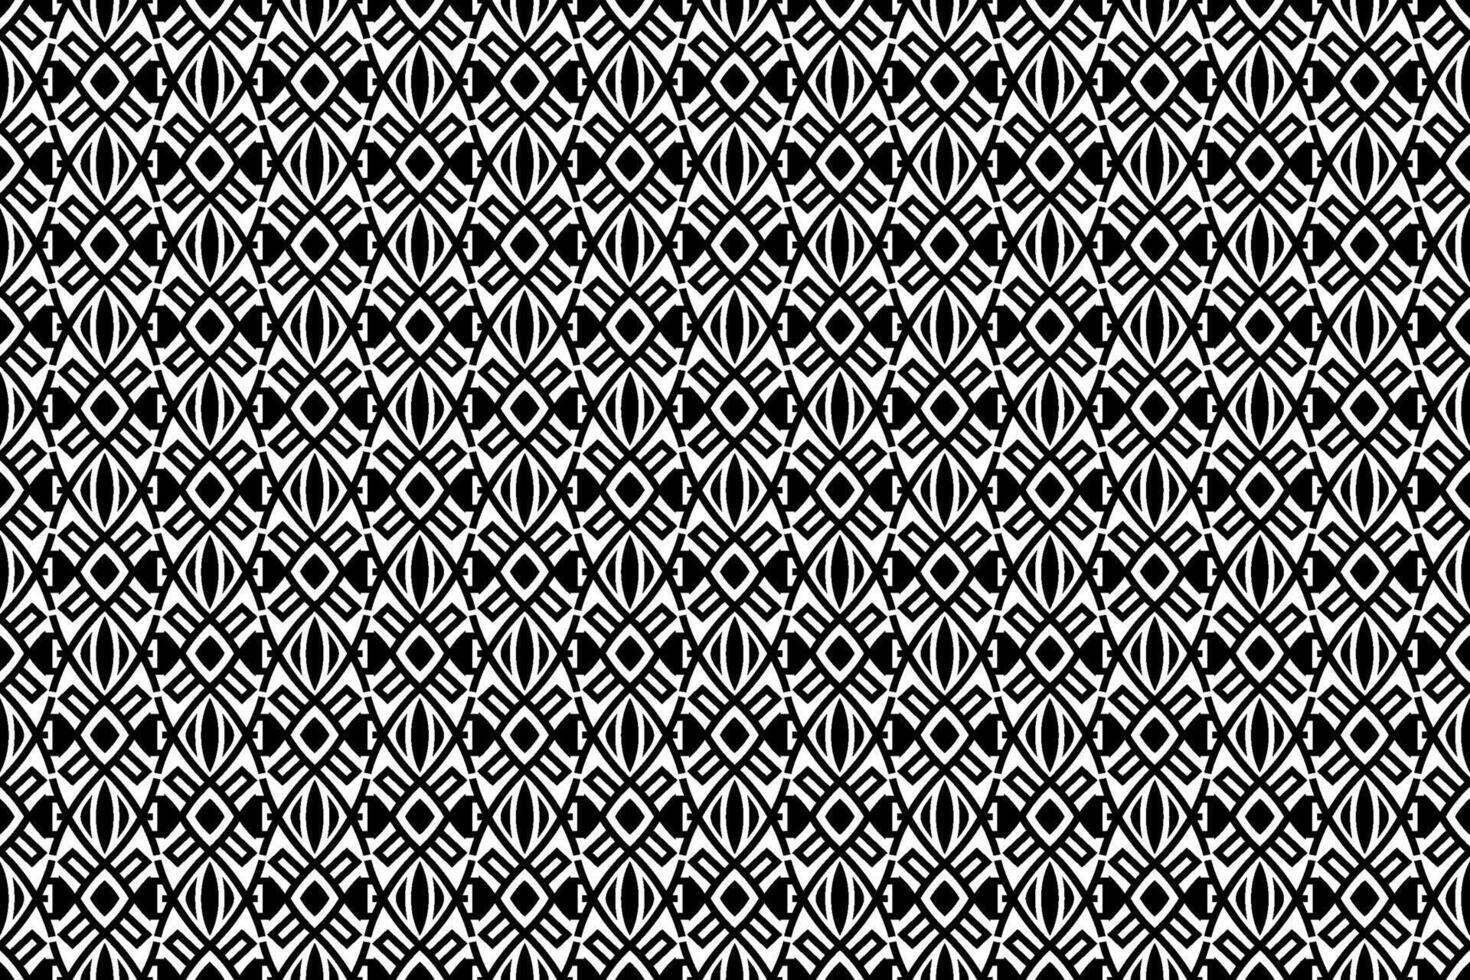 Monochrome black and white pattern. Abstract mosaic texture for fabric, print, table cloth, banner, cover, card, scarf, soft furniture, invitation, decoration, wrapping paper, interior, wallpaper. vector